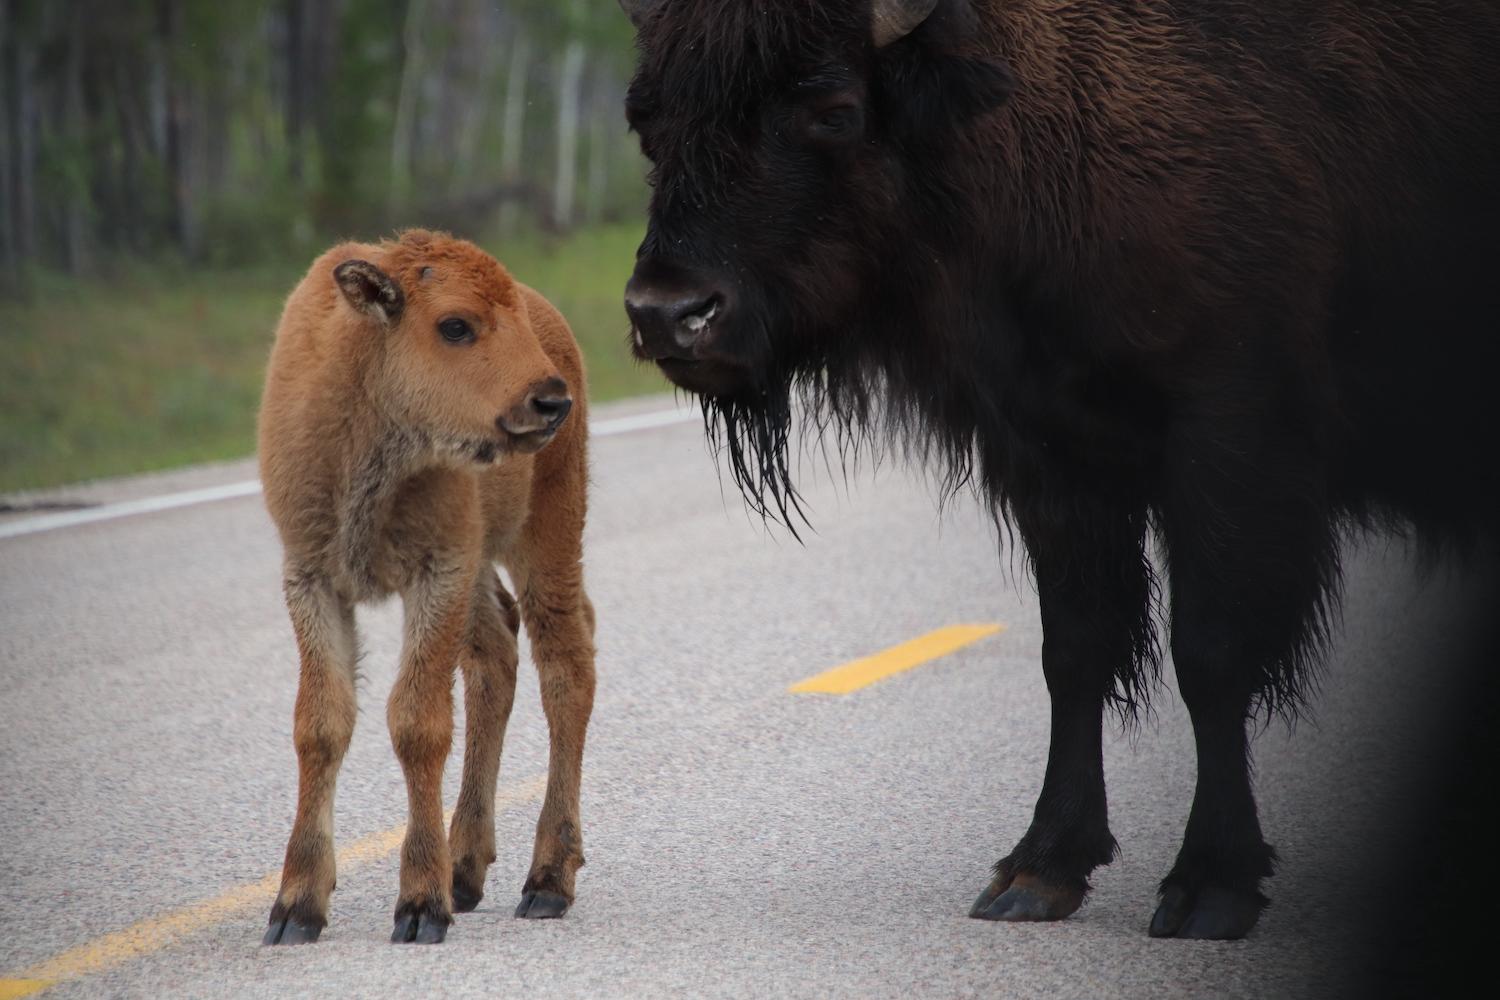 Wood Buffalo National Park helps protect about 3,000 wood bison.